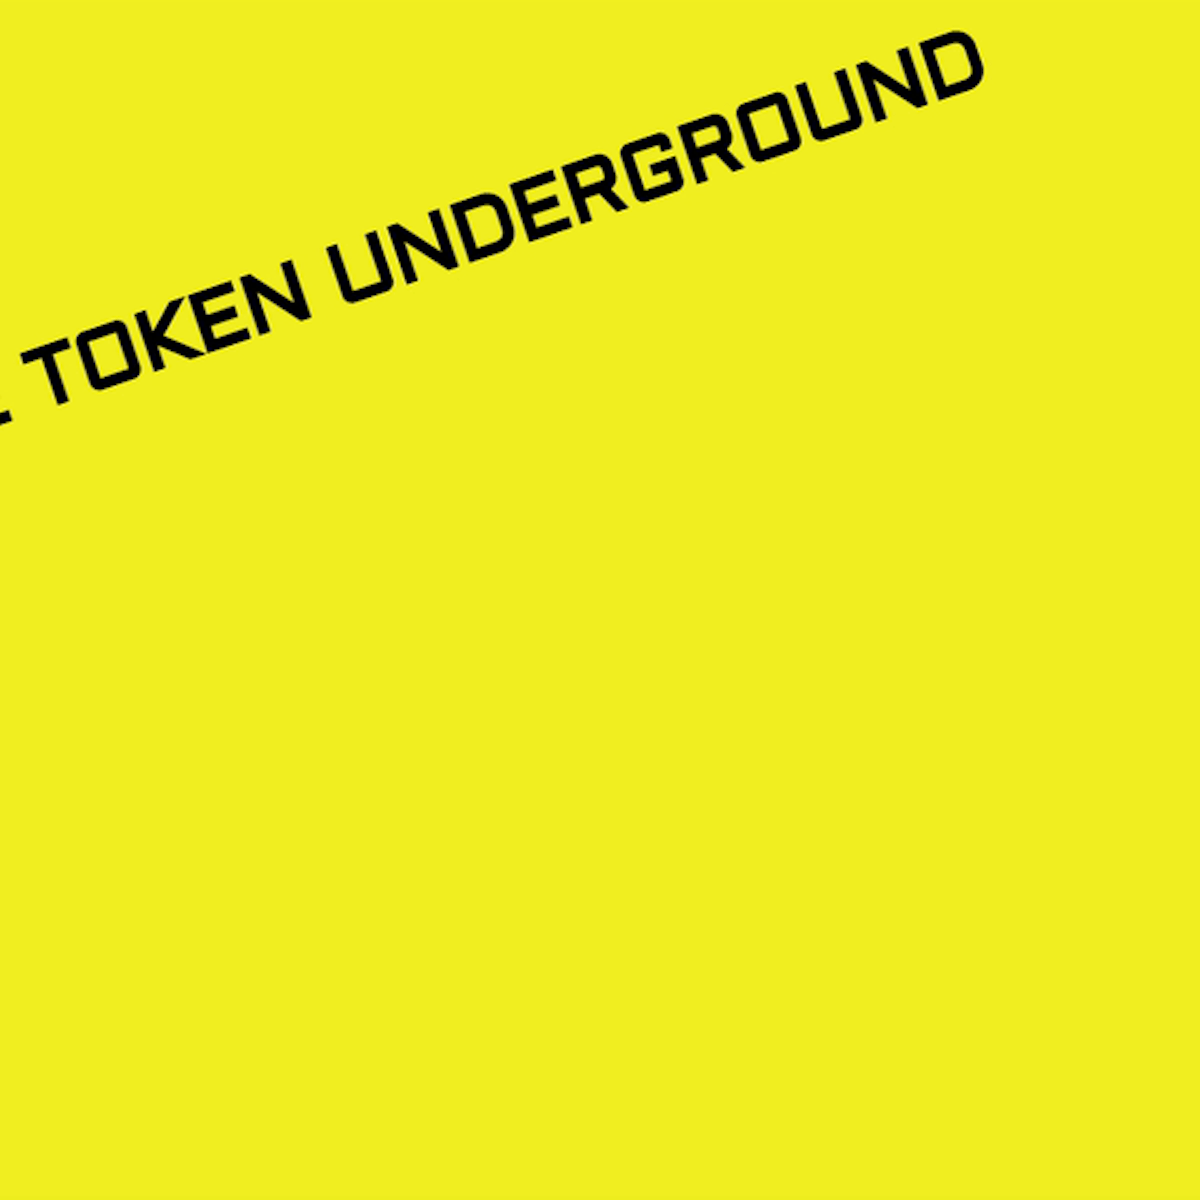 featured image - The Token Underground 0x0: the Great Brain Fog and the Fresh Start